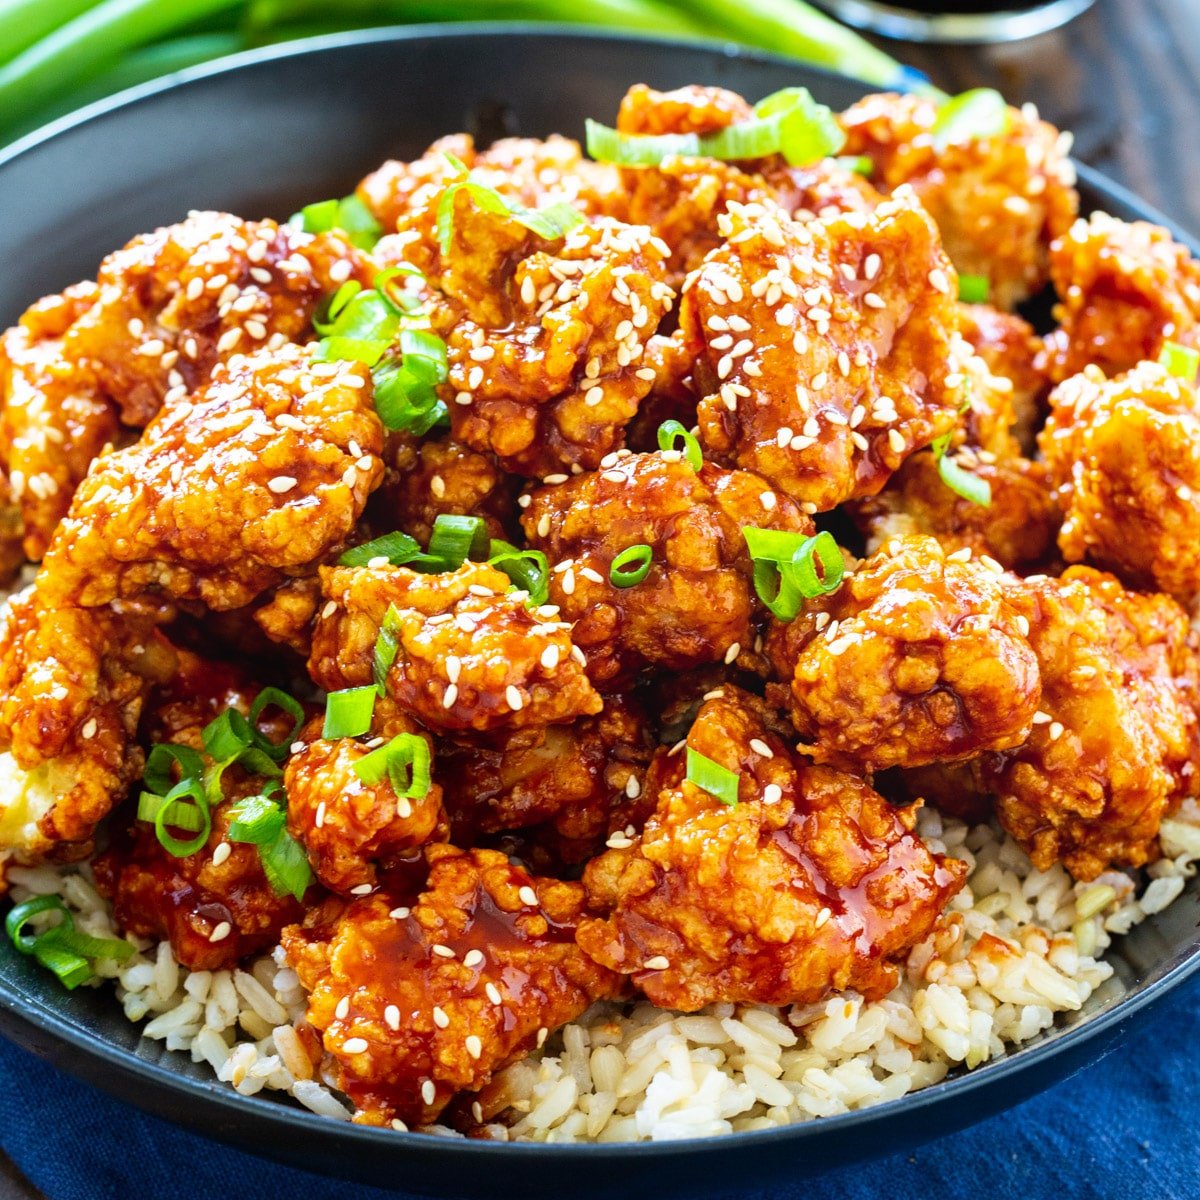 Korean Fried Chicken topped with sesame seeds and green onions.